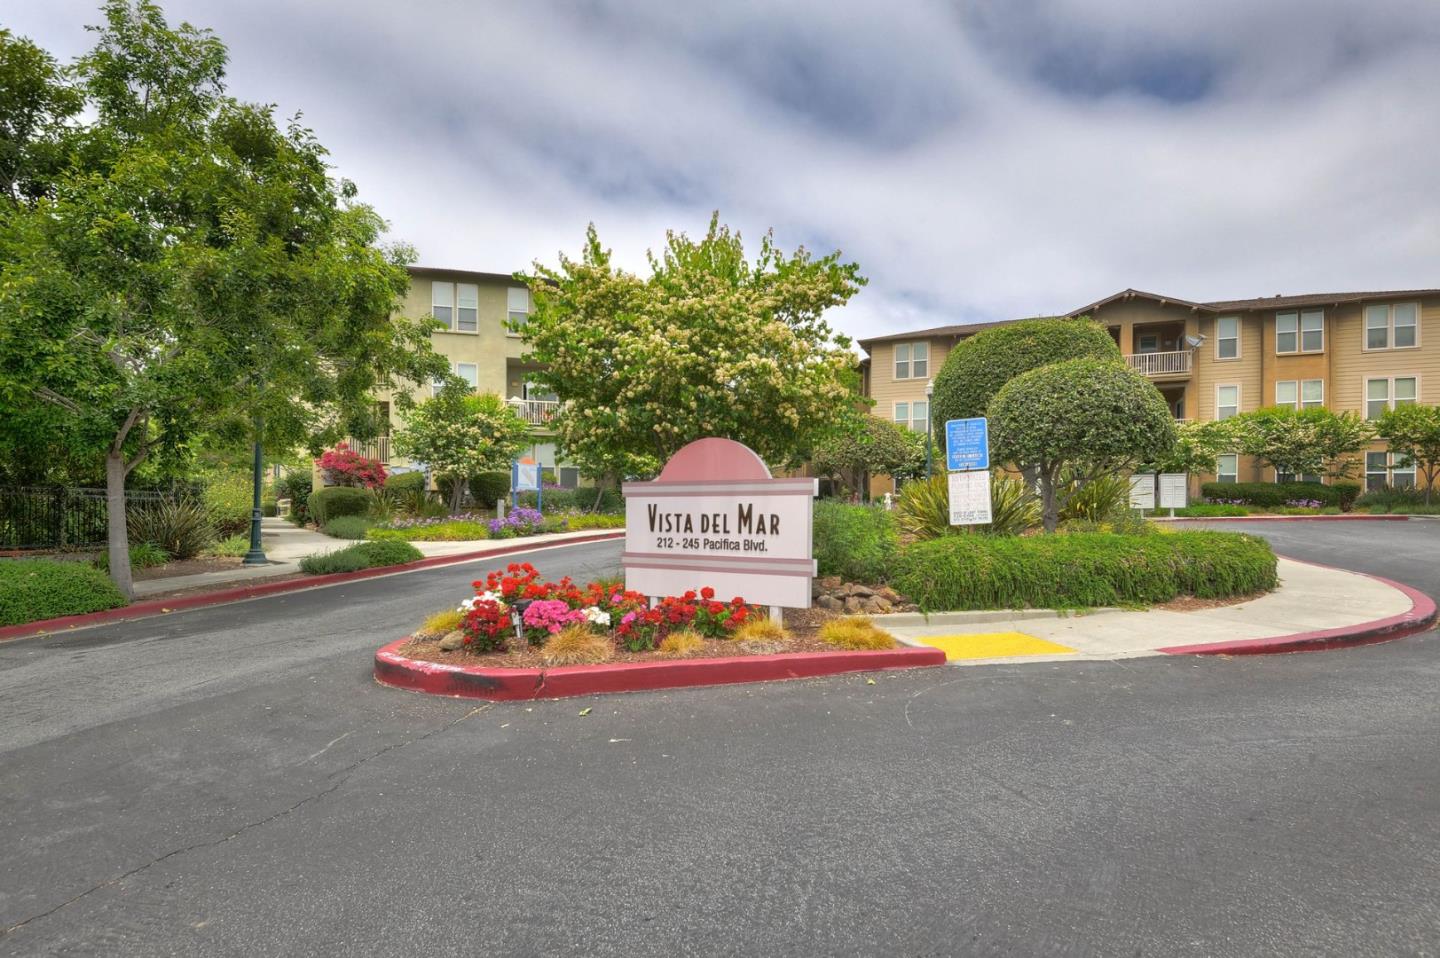 Photo of 212 Pacifica Blvd #203 in Watsonville, CA